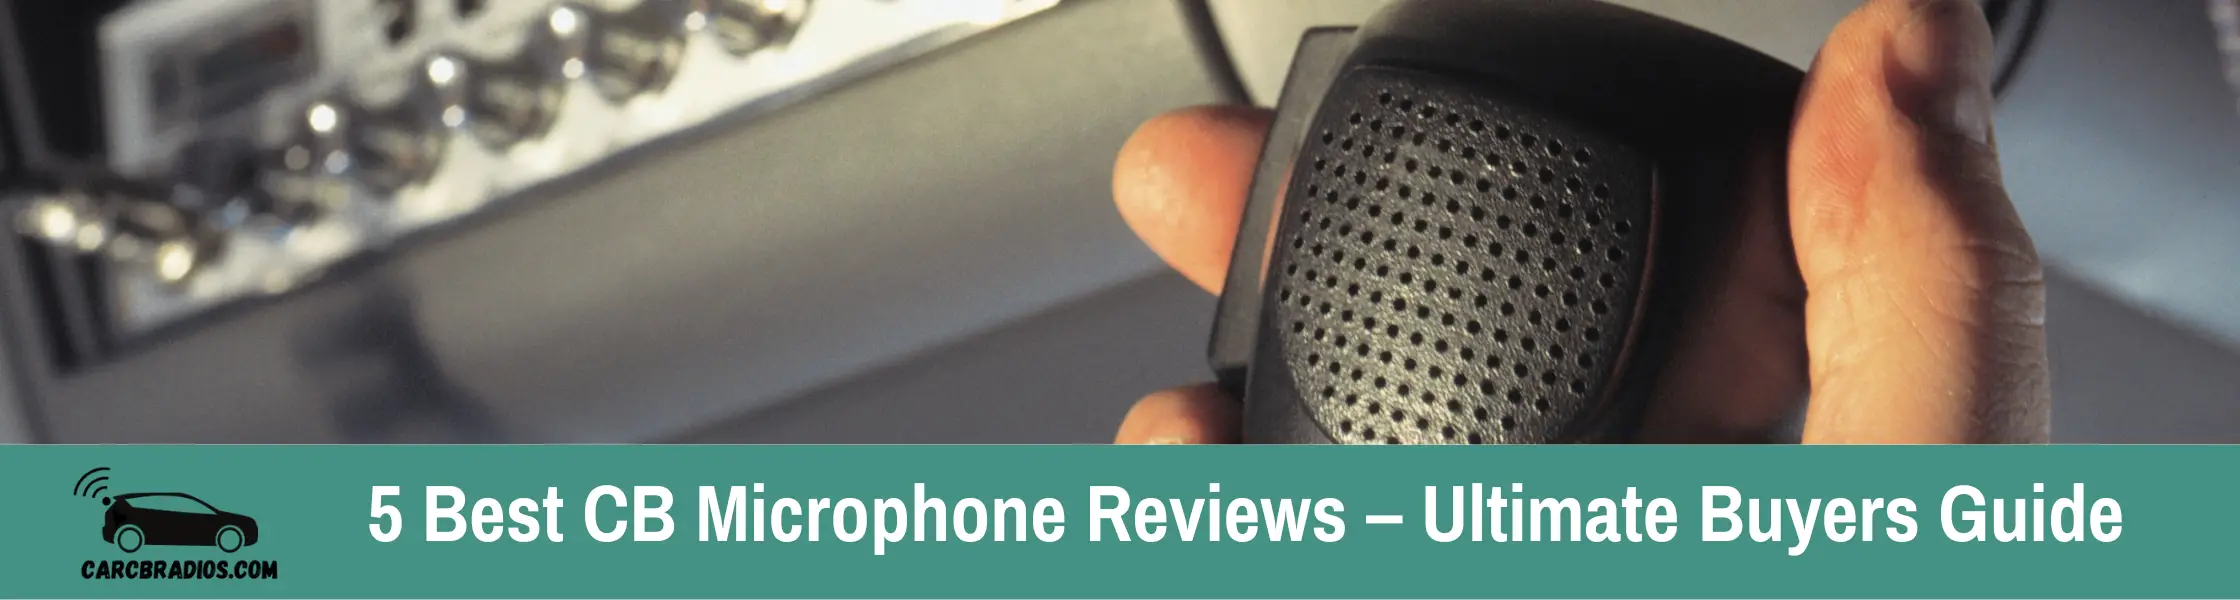 5 Best CB Microphone Reviews